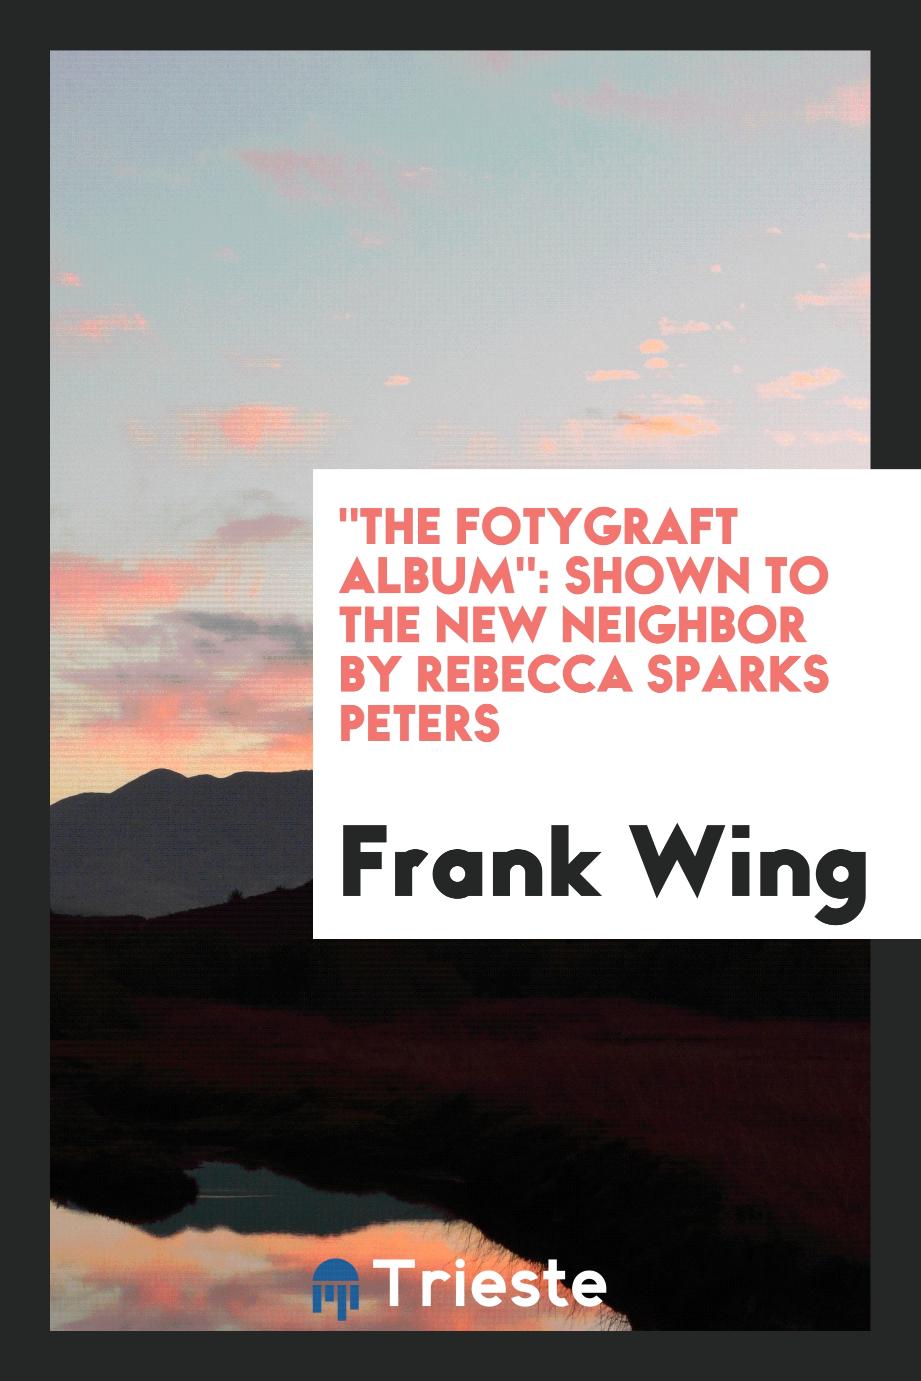 "The Fotygraft Album": Shown to the New Neighbor by Rebecca Sparks Peters